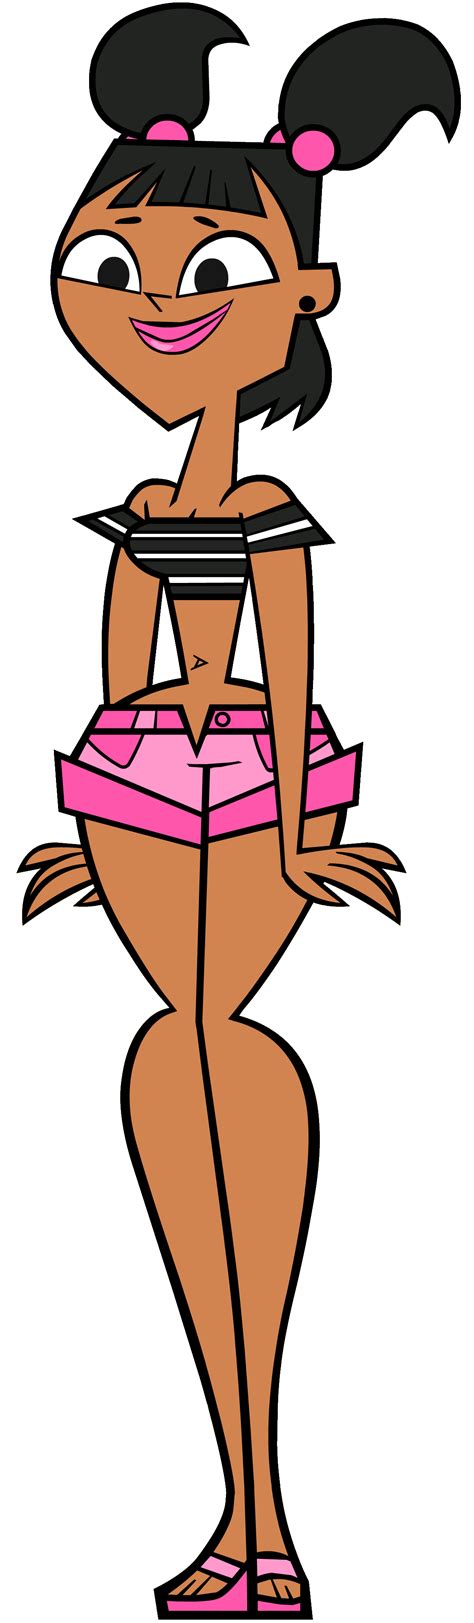 let s draw katie from total drama island are you up for the challenge